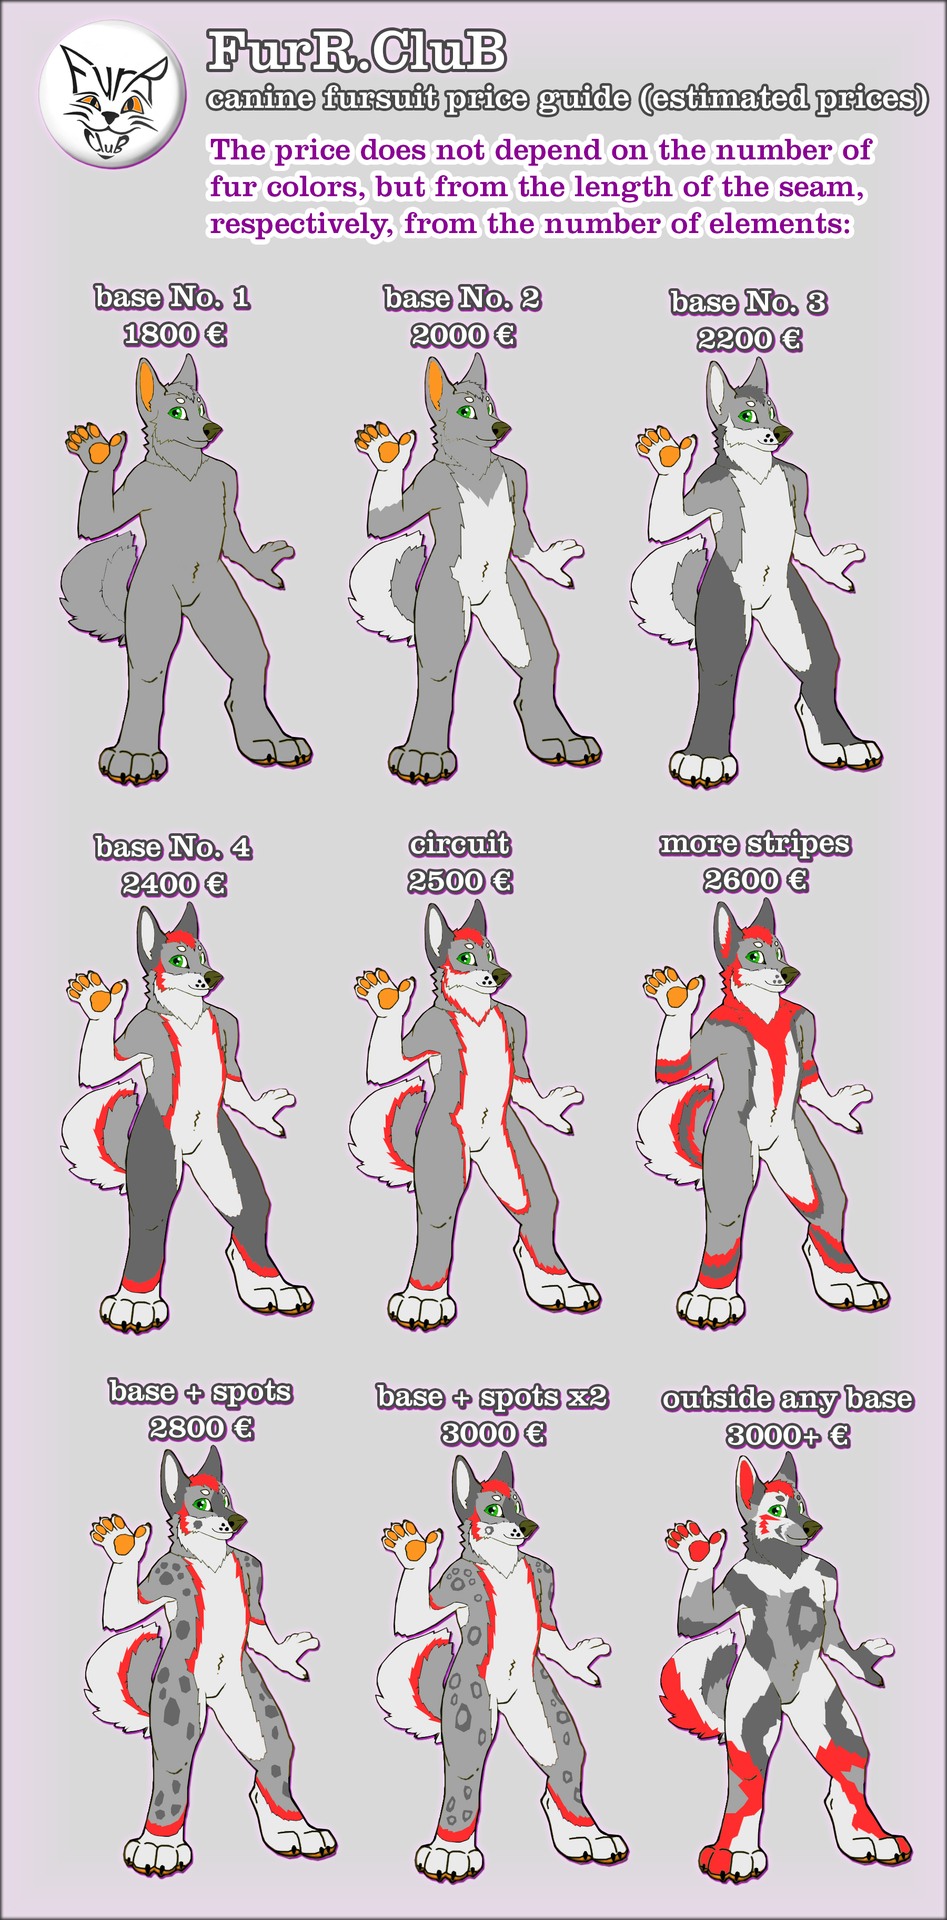 The FurR.Club fursuits price guide for canine